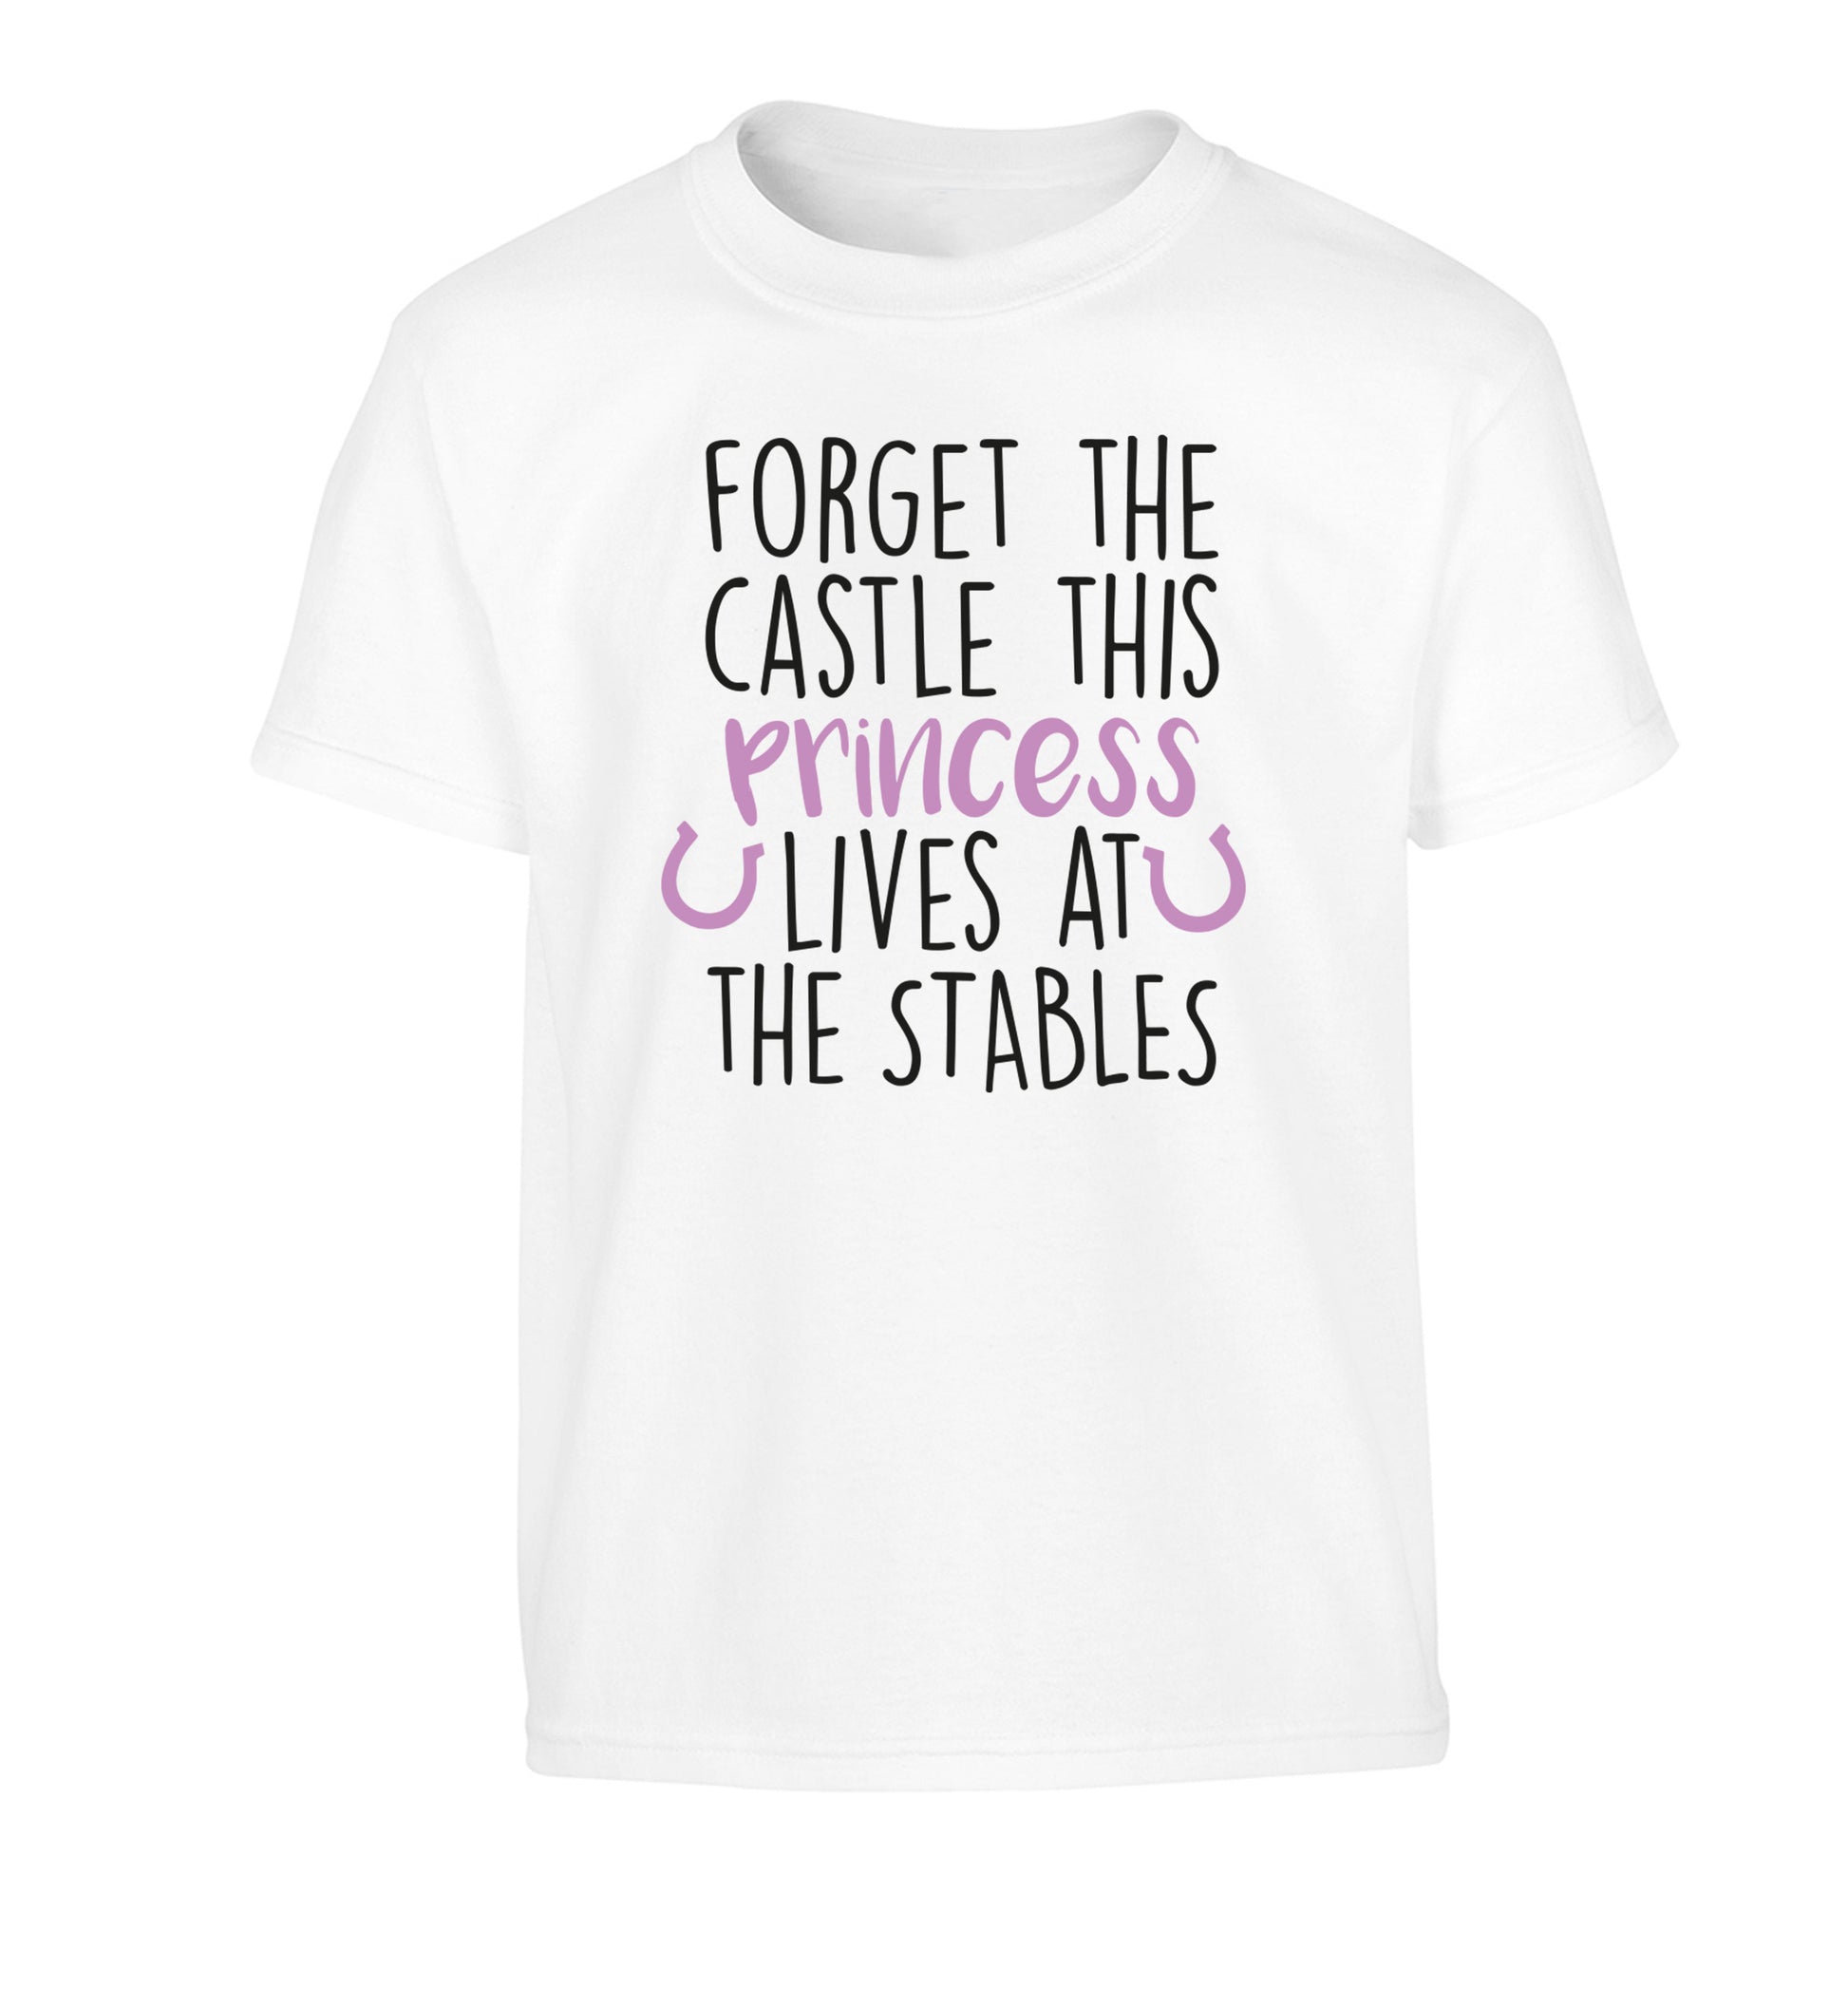 Forget the castle this princess lives at the stables Children's white Tshirt 12-14 Years